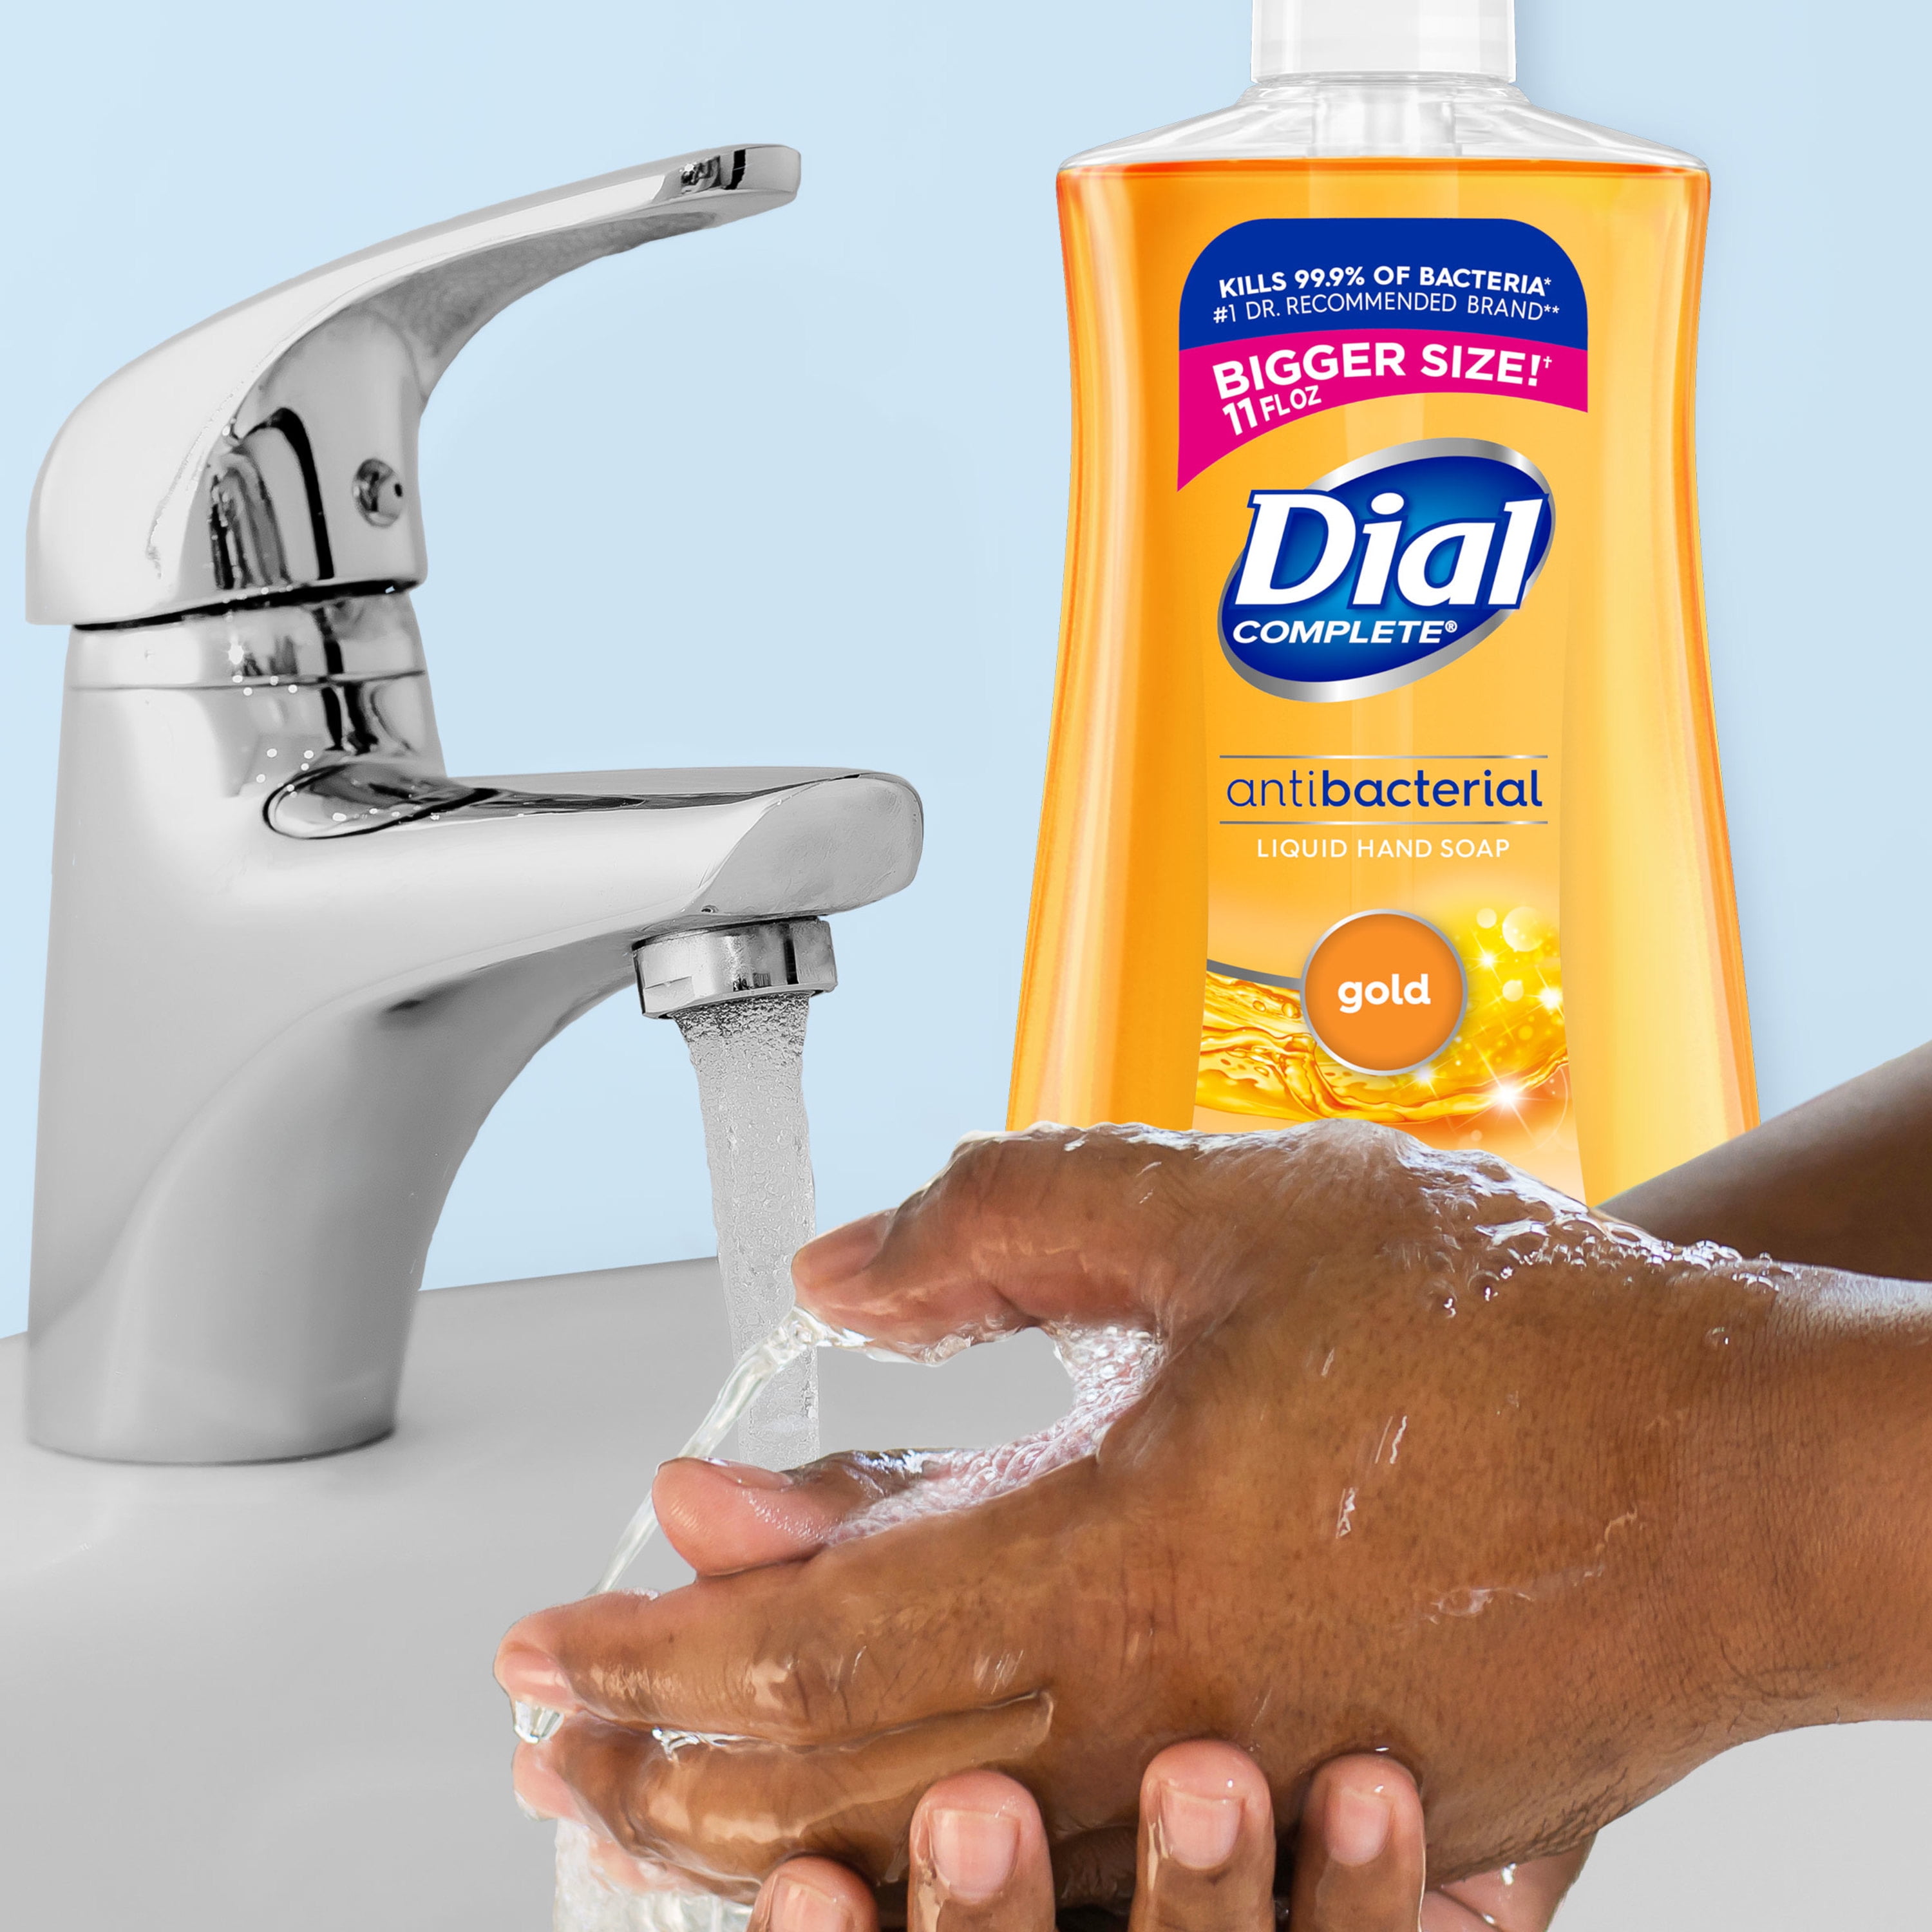 Buy Dial Gold Antibacterial Deodorant Soap By 3 Count Online at Low Prices  in India  Amazonin